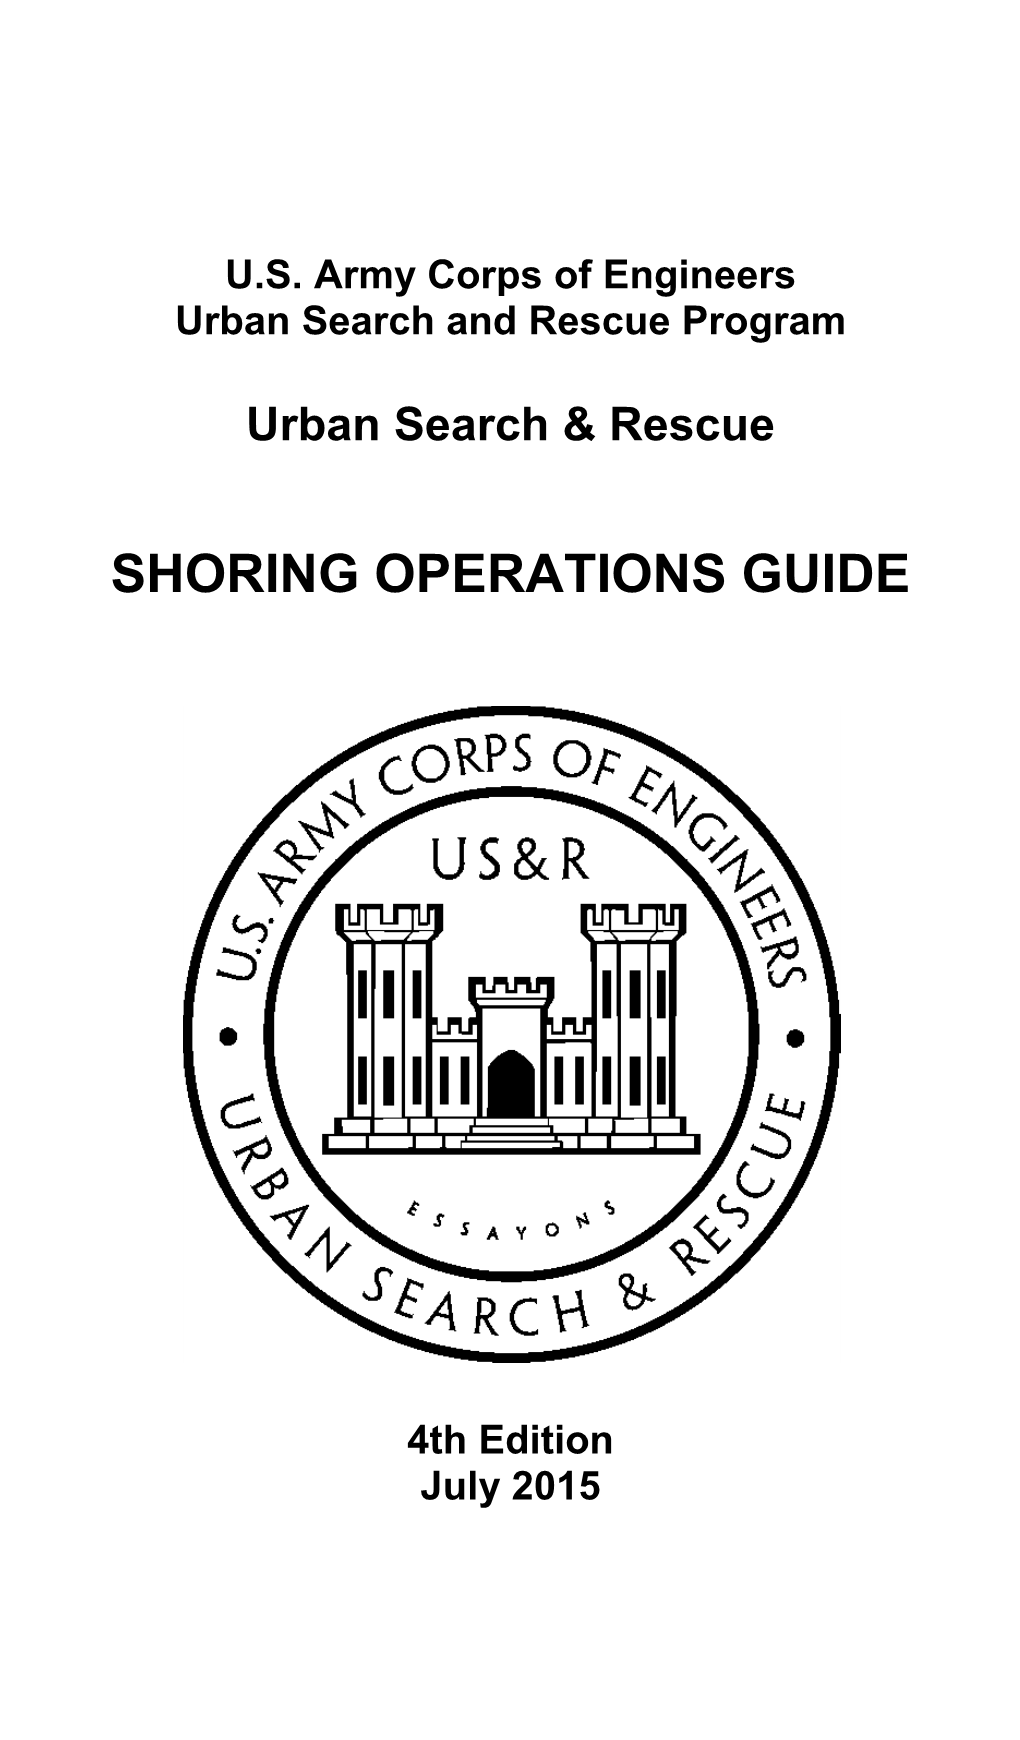 Shoring Operations Guide